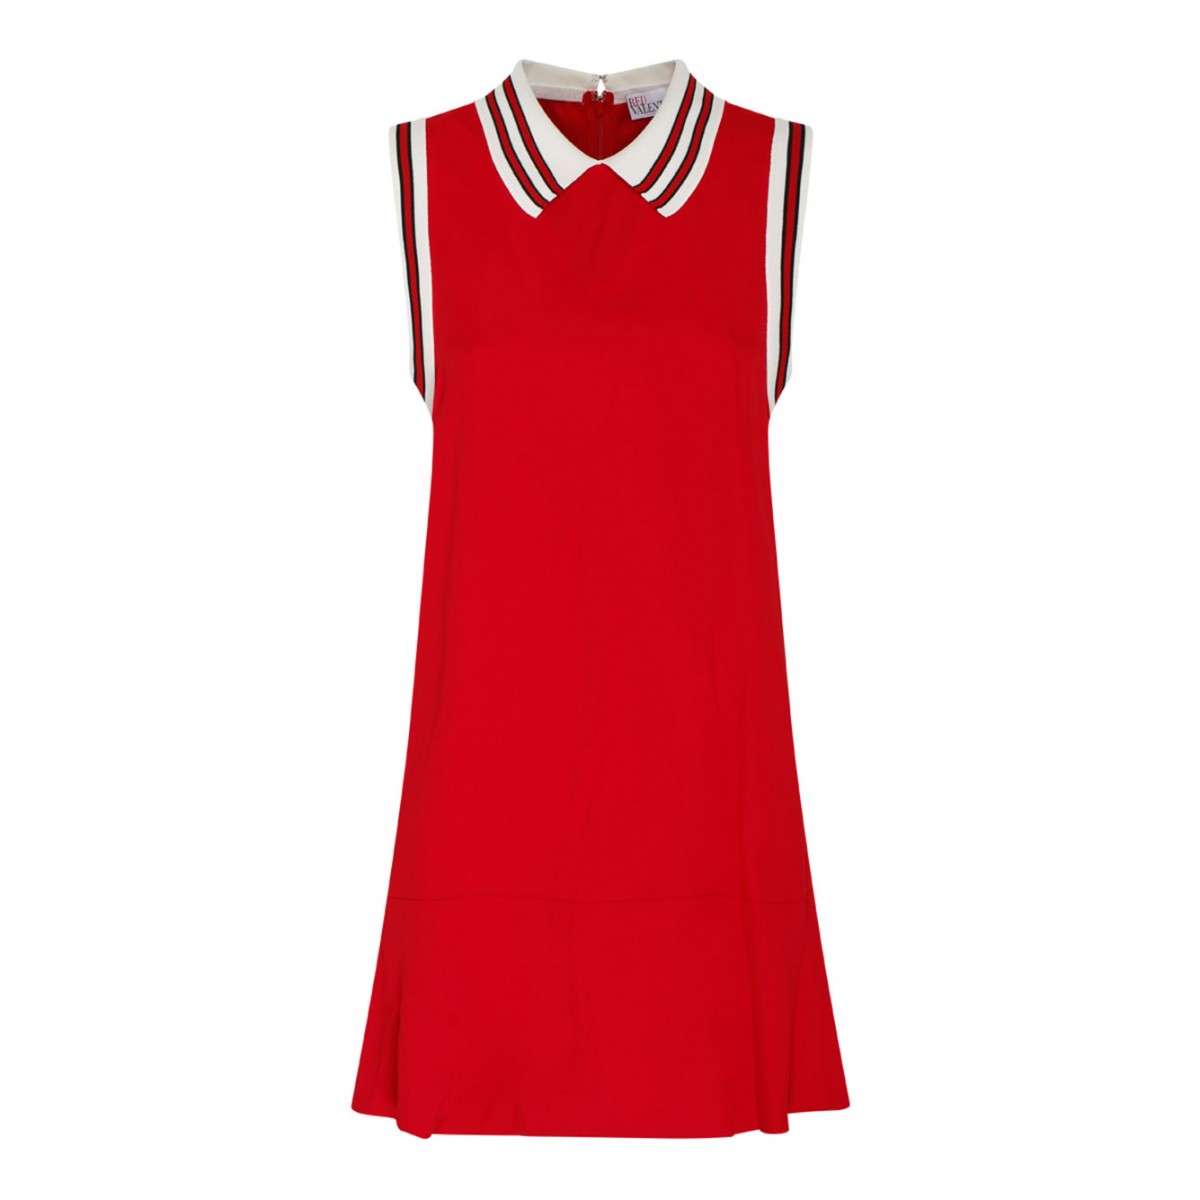 Red Valentino Red and White Short Dress.